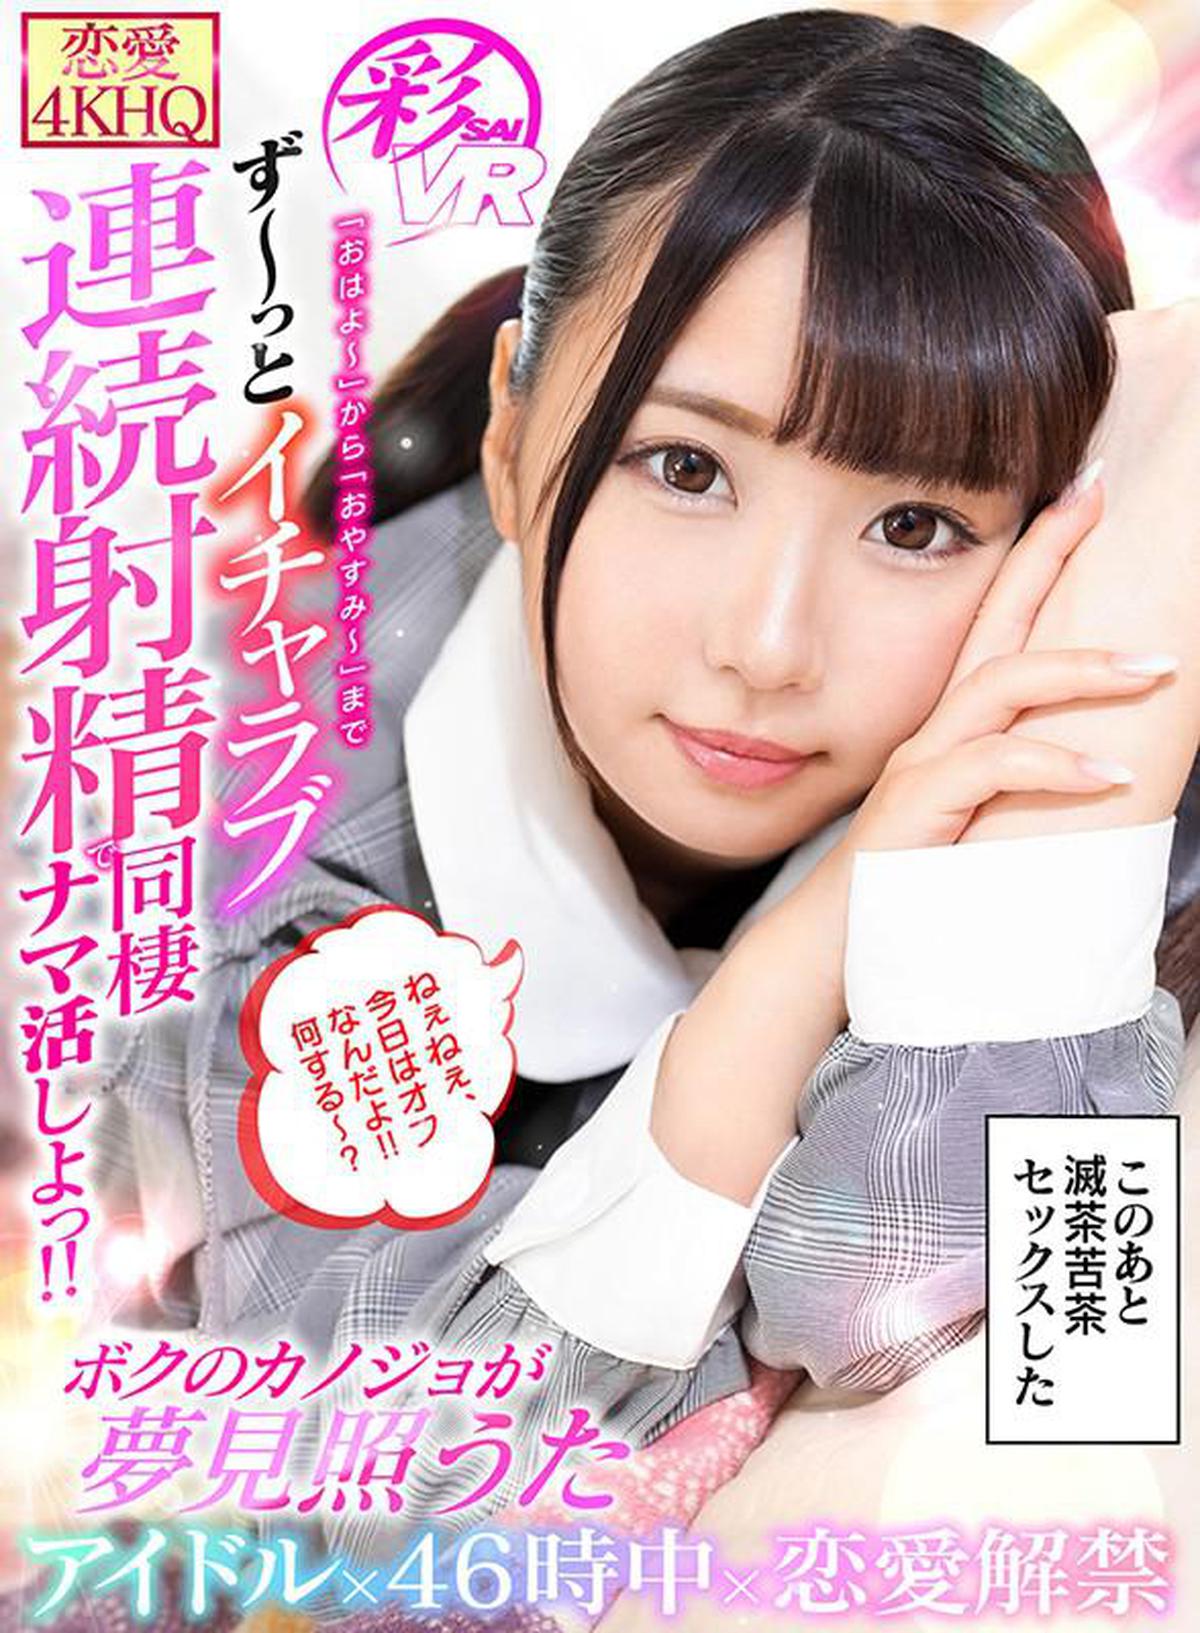 (VR) KBVR-037 My girlfriend dreams of shining from "Good morning" to "Good night" Icharab Let's live together with continuous ejaculation! !! Idol x 46 o'clock x love ban lifted